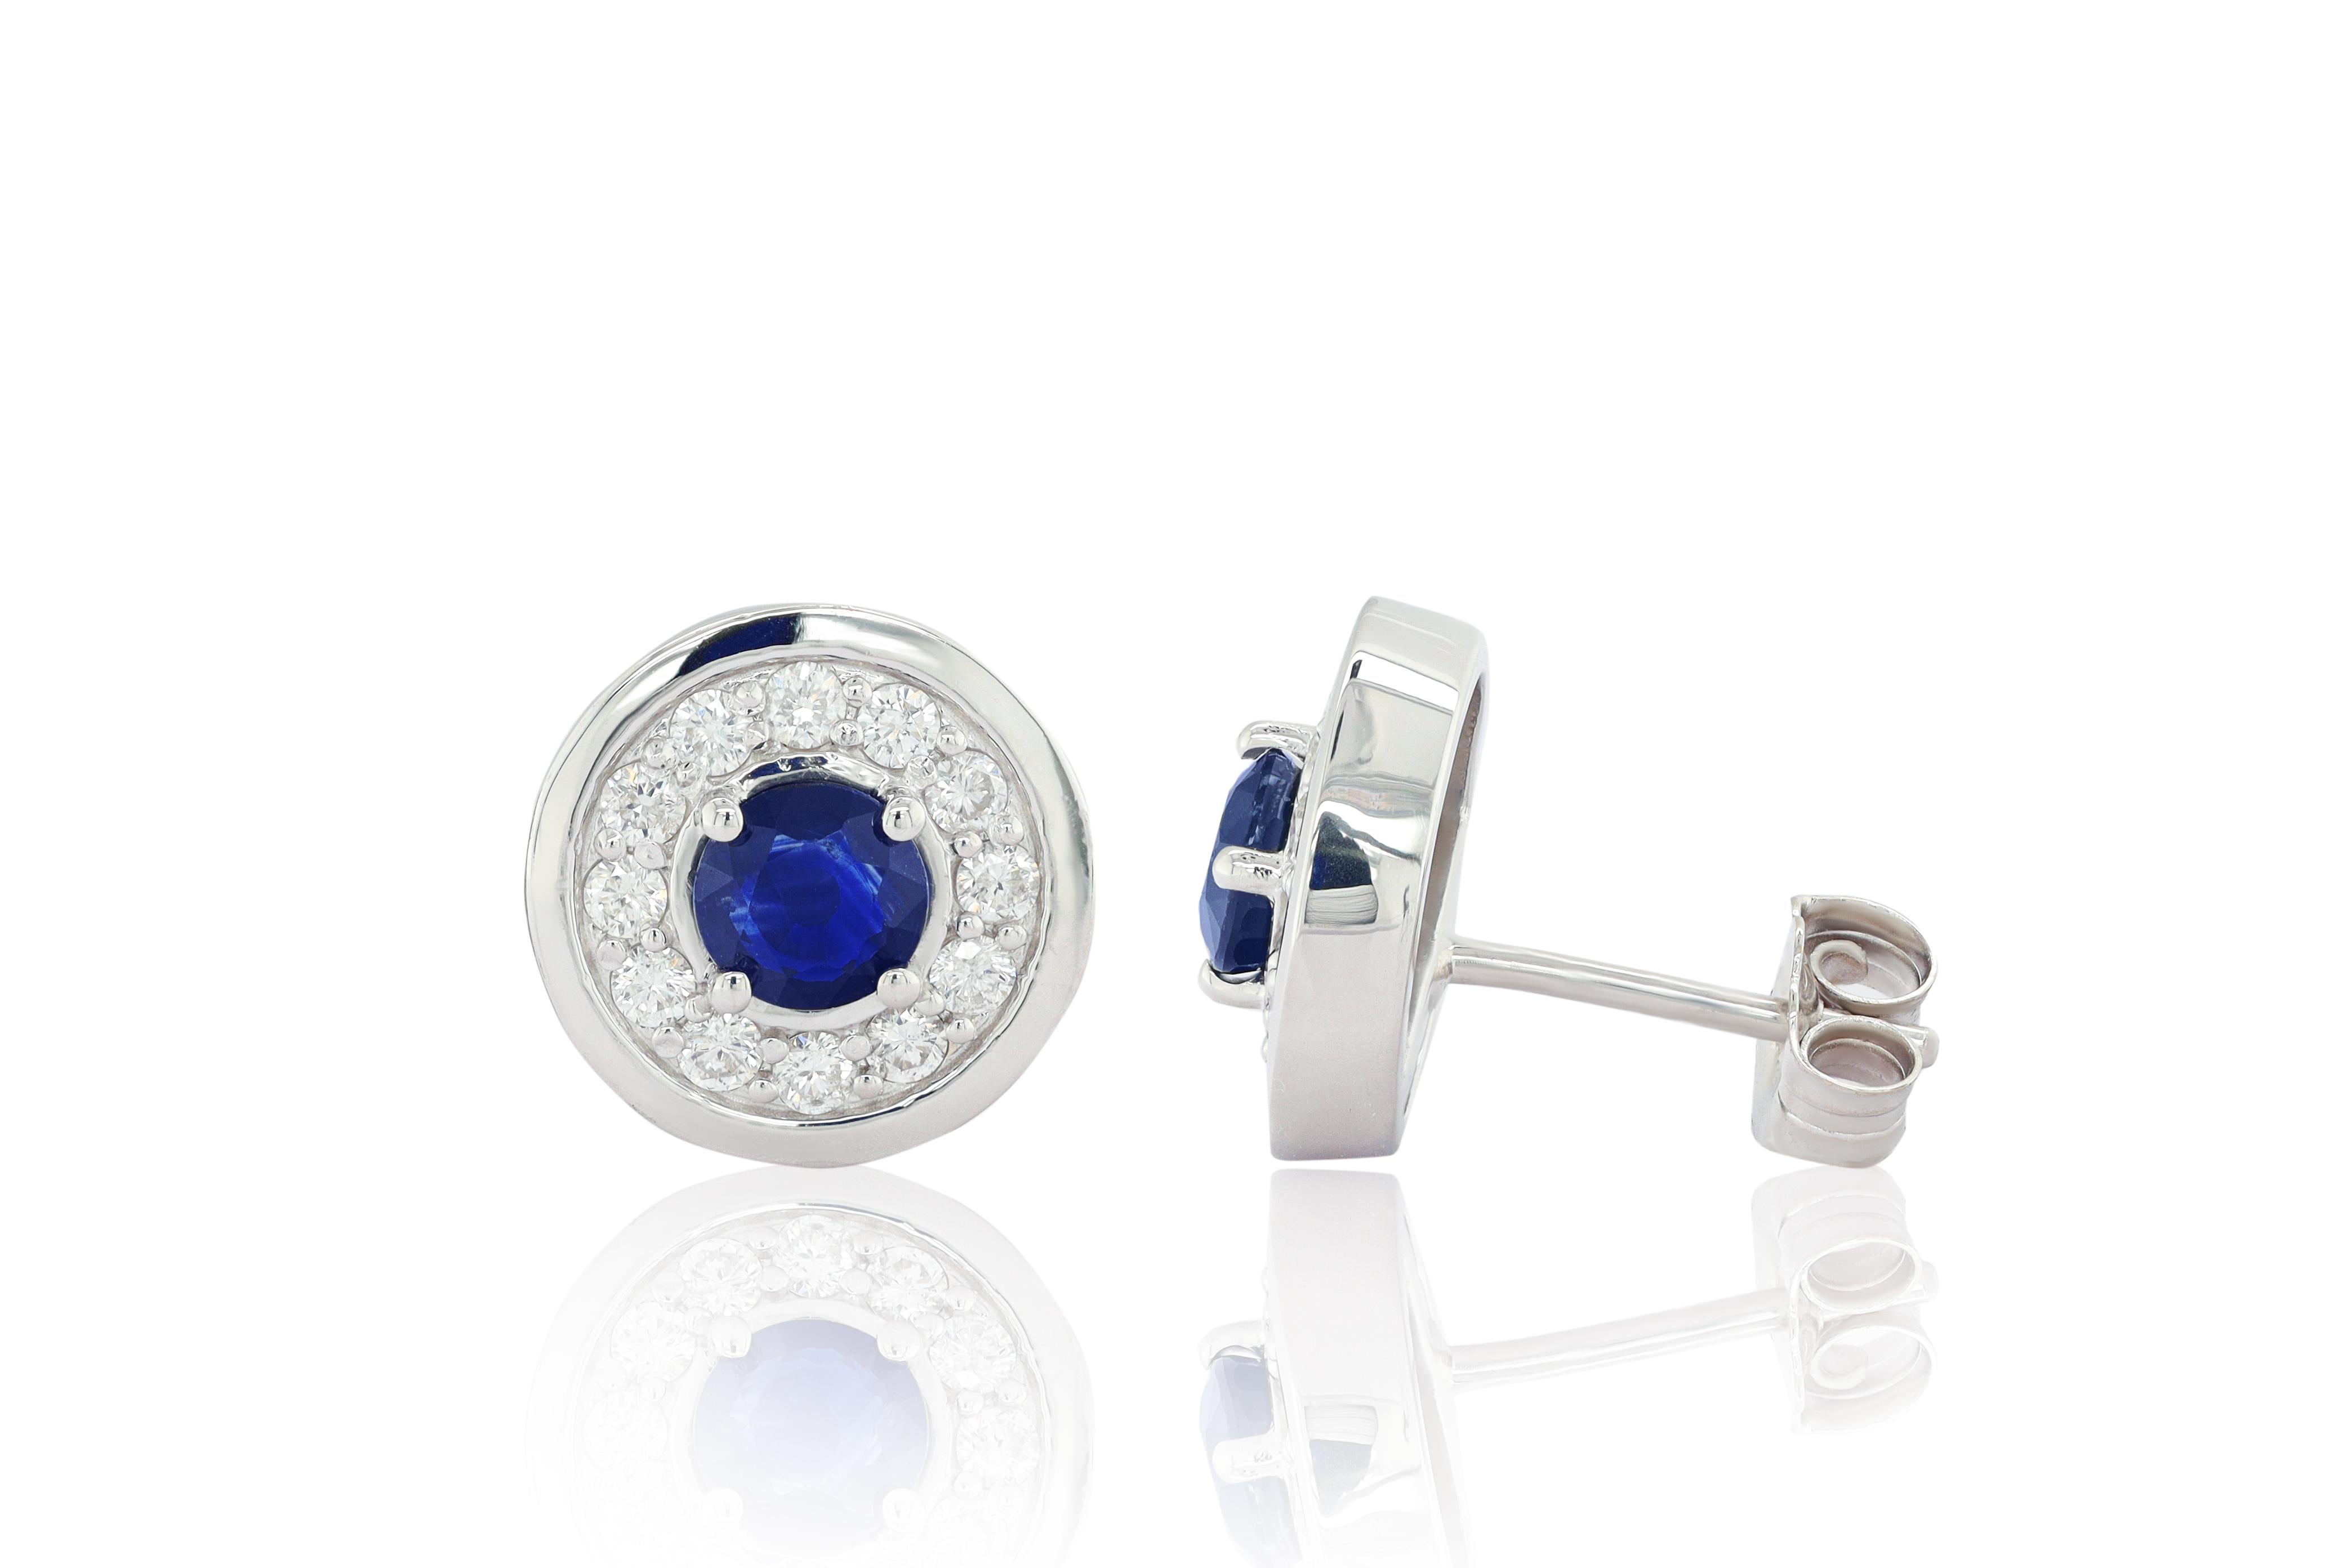 18K White Gold Sapphire and Diamond Earrings features 0.20 Carats of Diamonds and 0.75 Carats of Sapphires

Underline your look with this sharp 18K White gold shape Diamond Earrings. High quality Diamonds. This Earrings will underline your exquisite